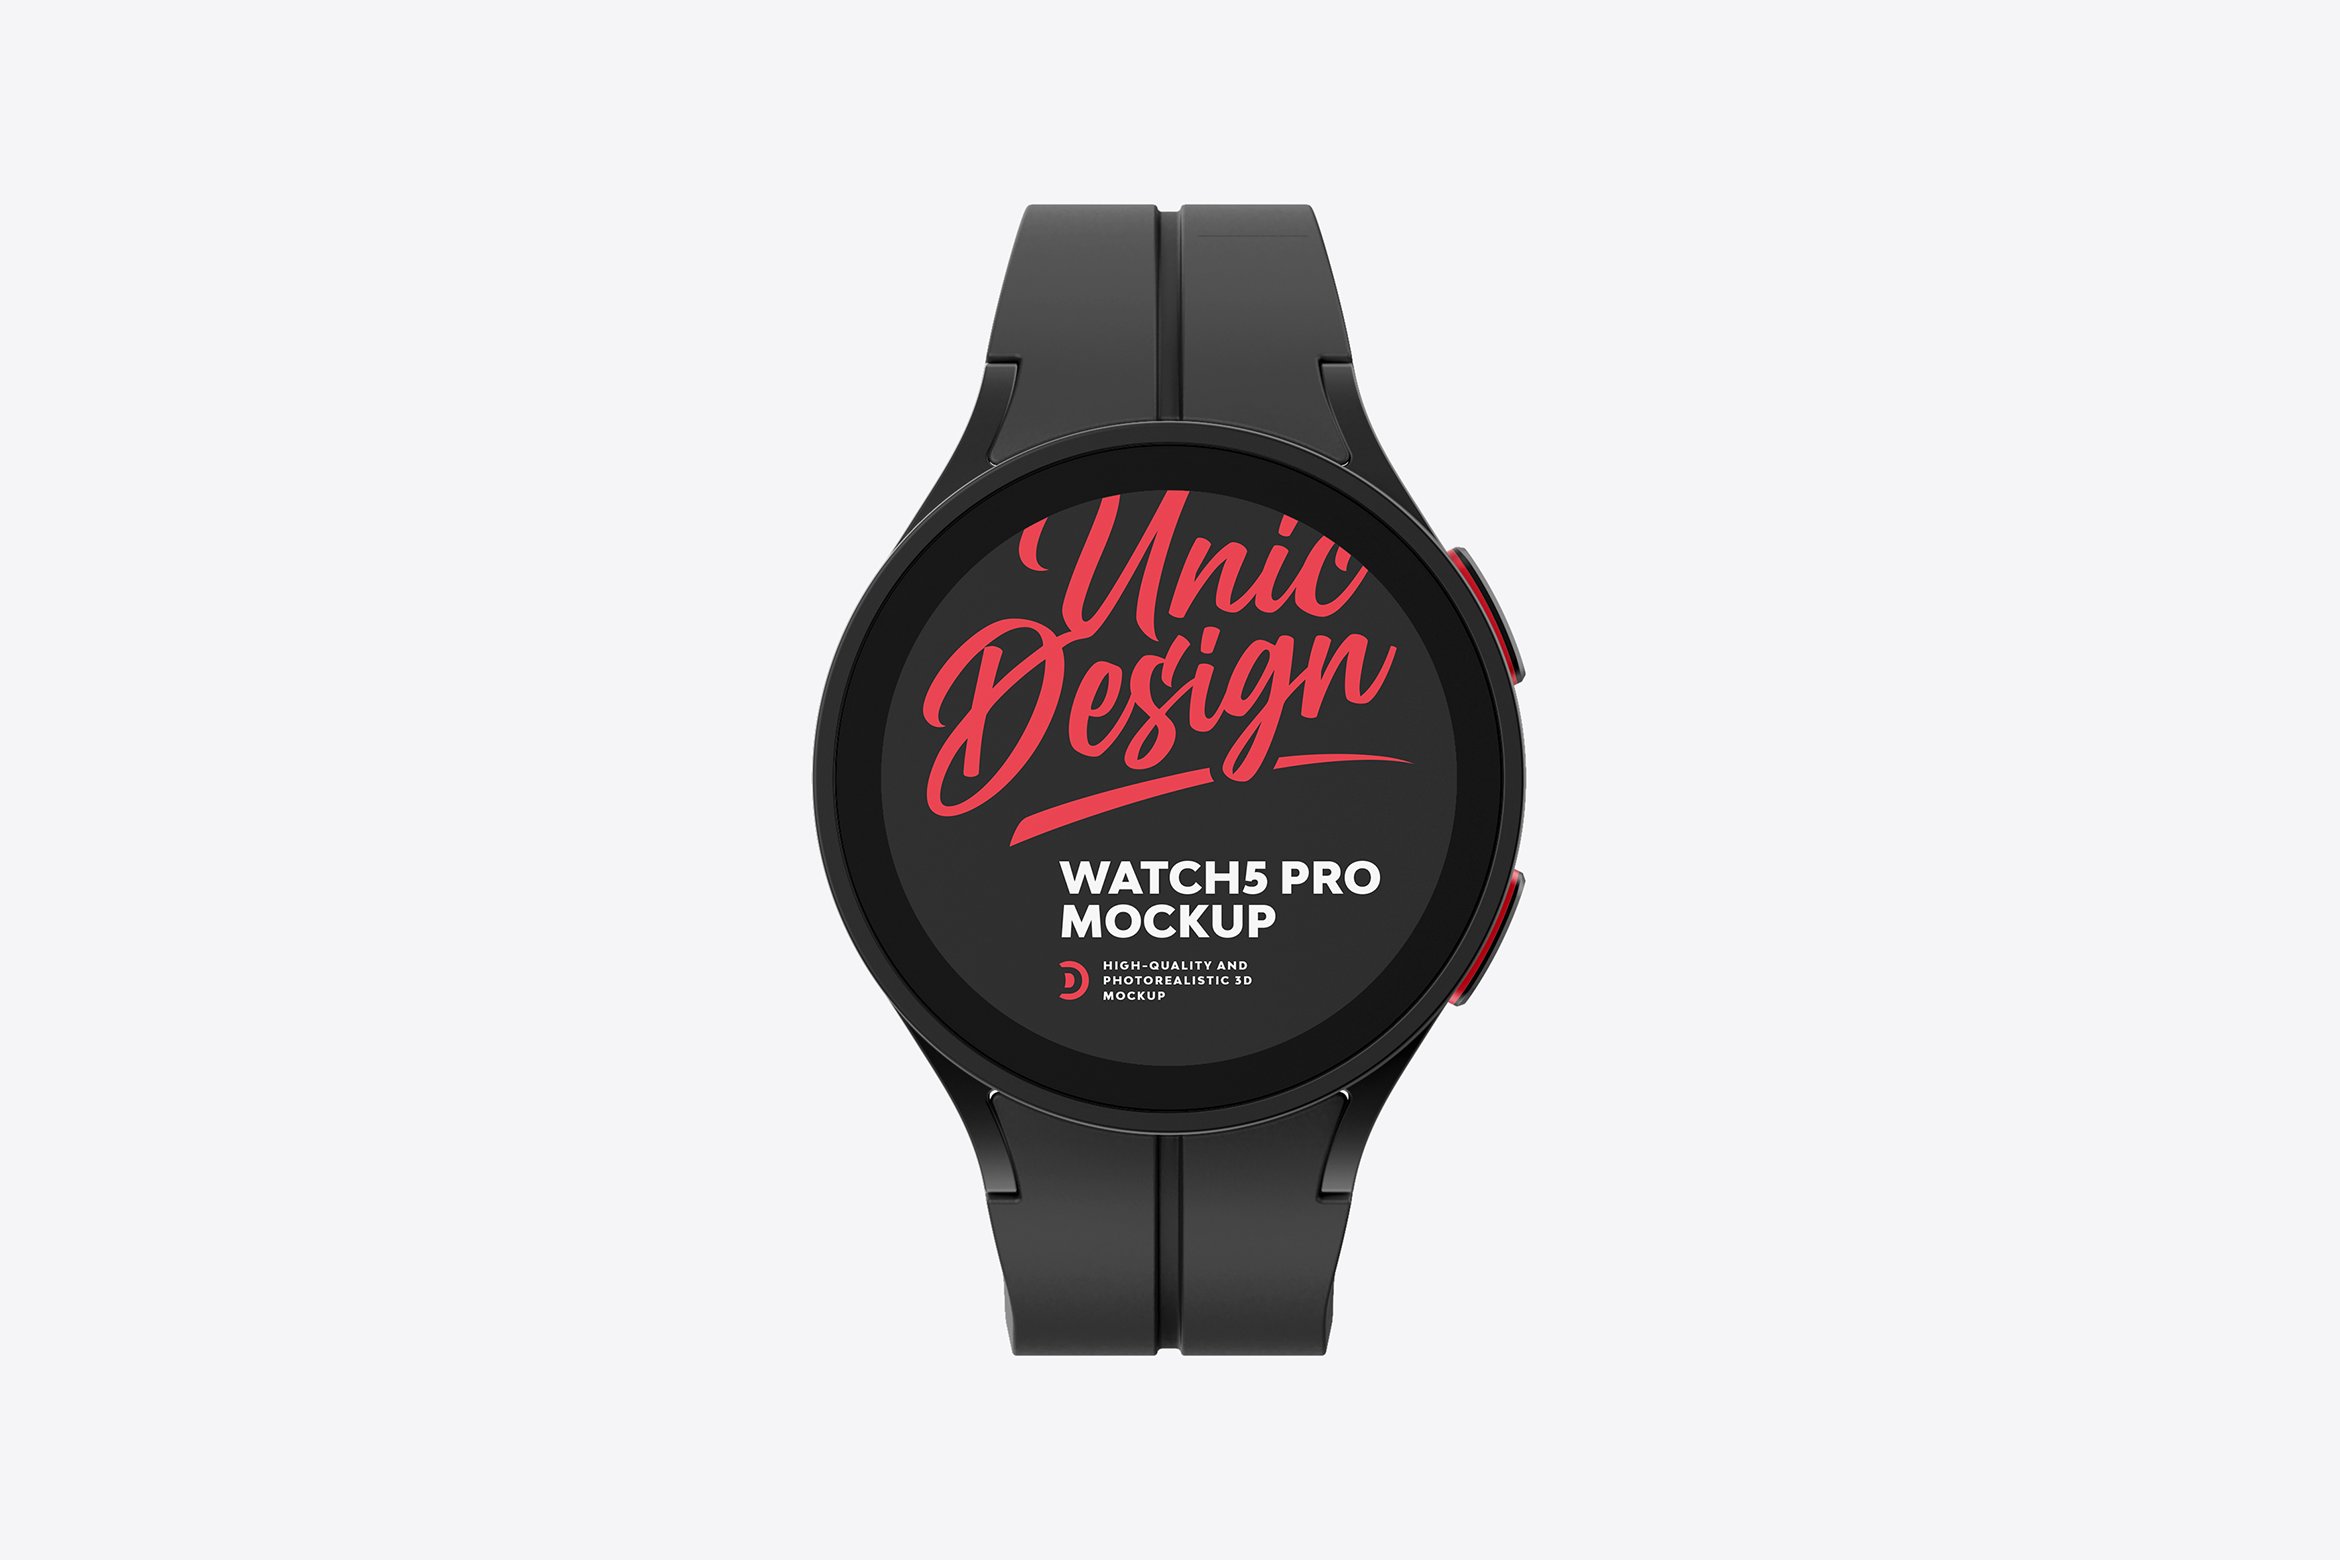 Watch5 Pro Mockup cover image.